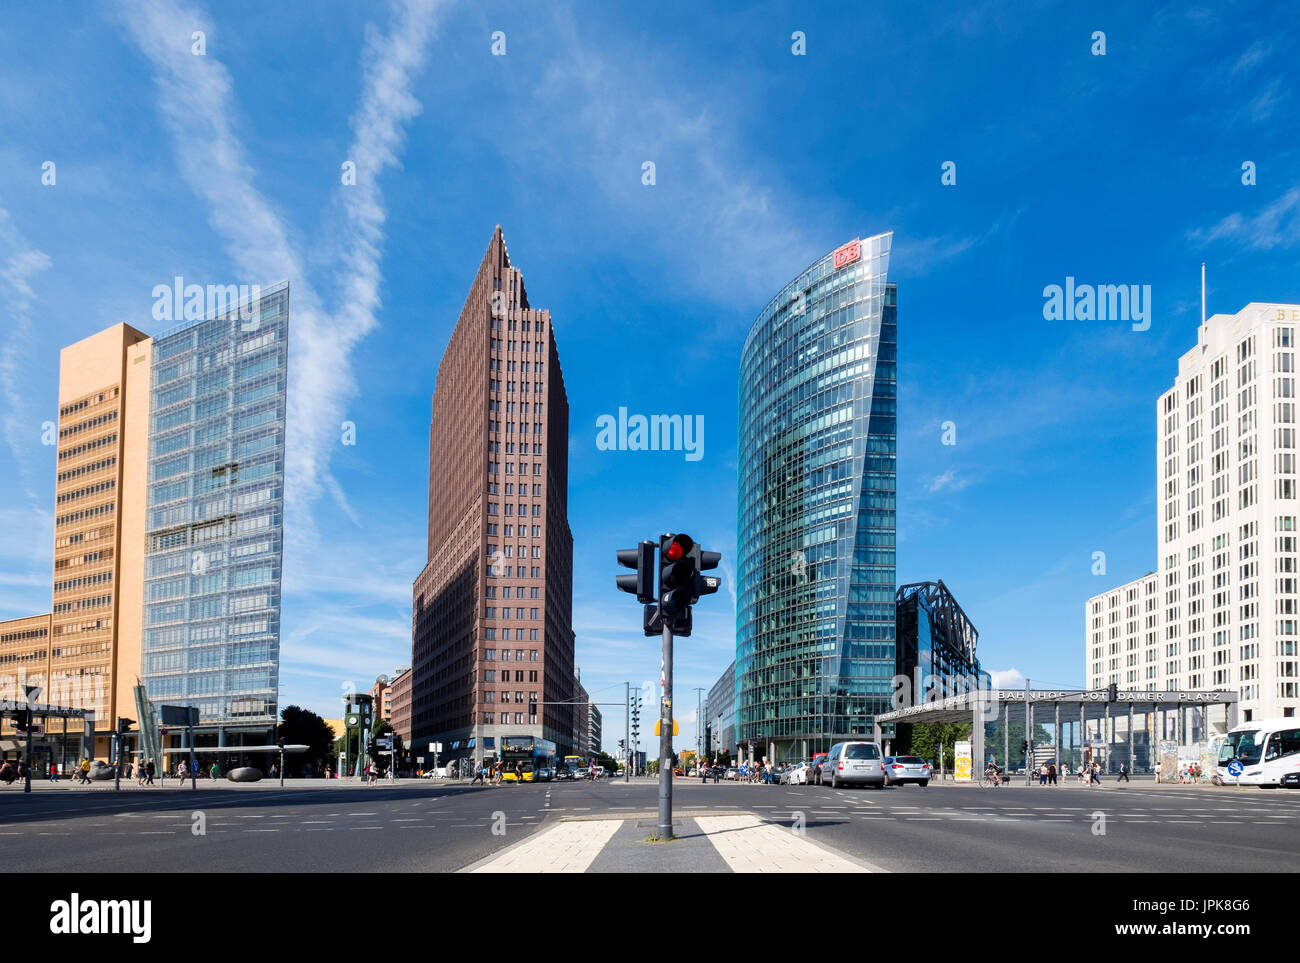 Cityscape of Potsdamer Platz modern business and entertainment district in Berlin, Germany Stock Photo